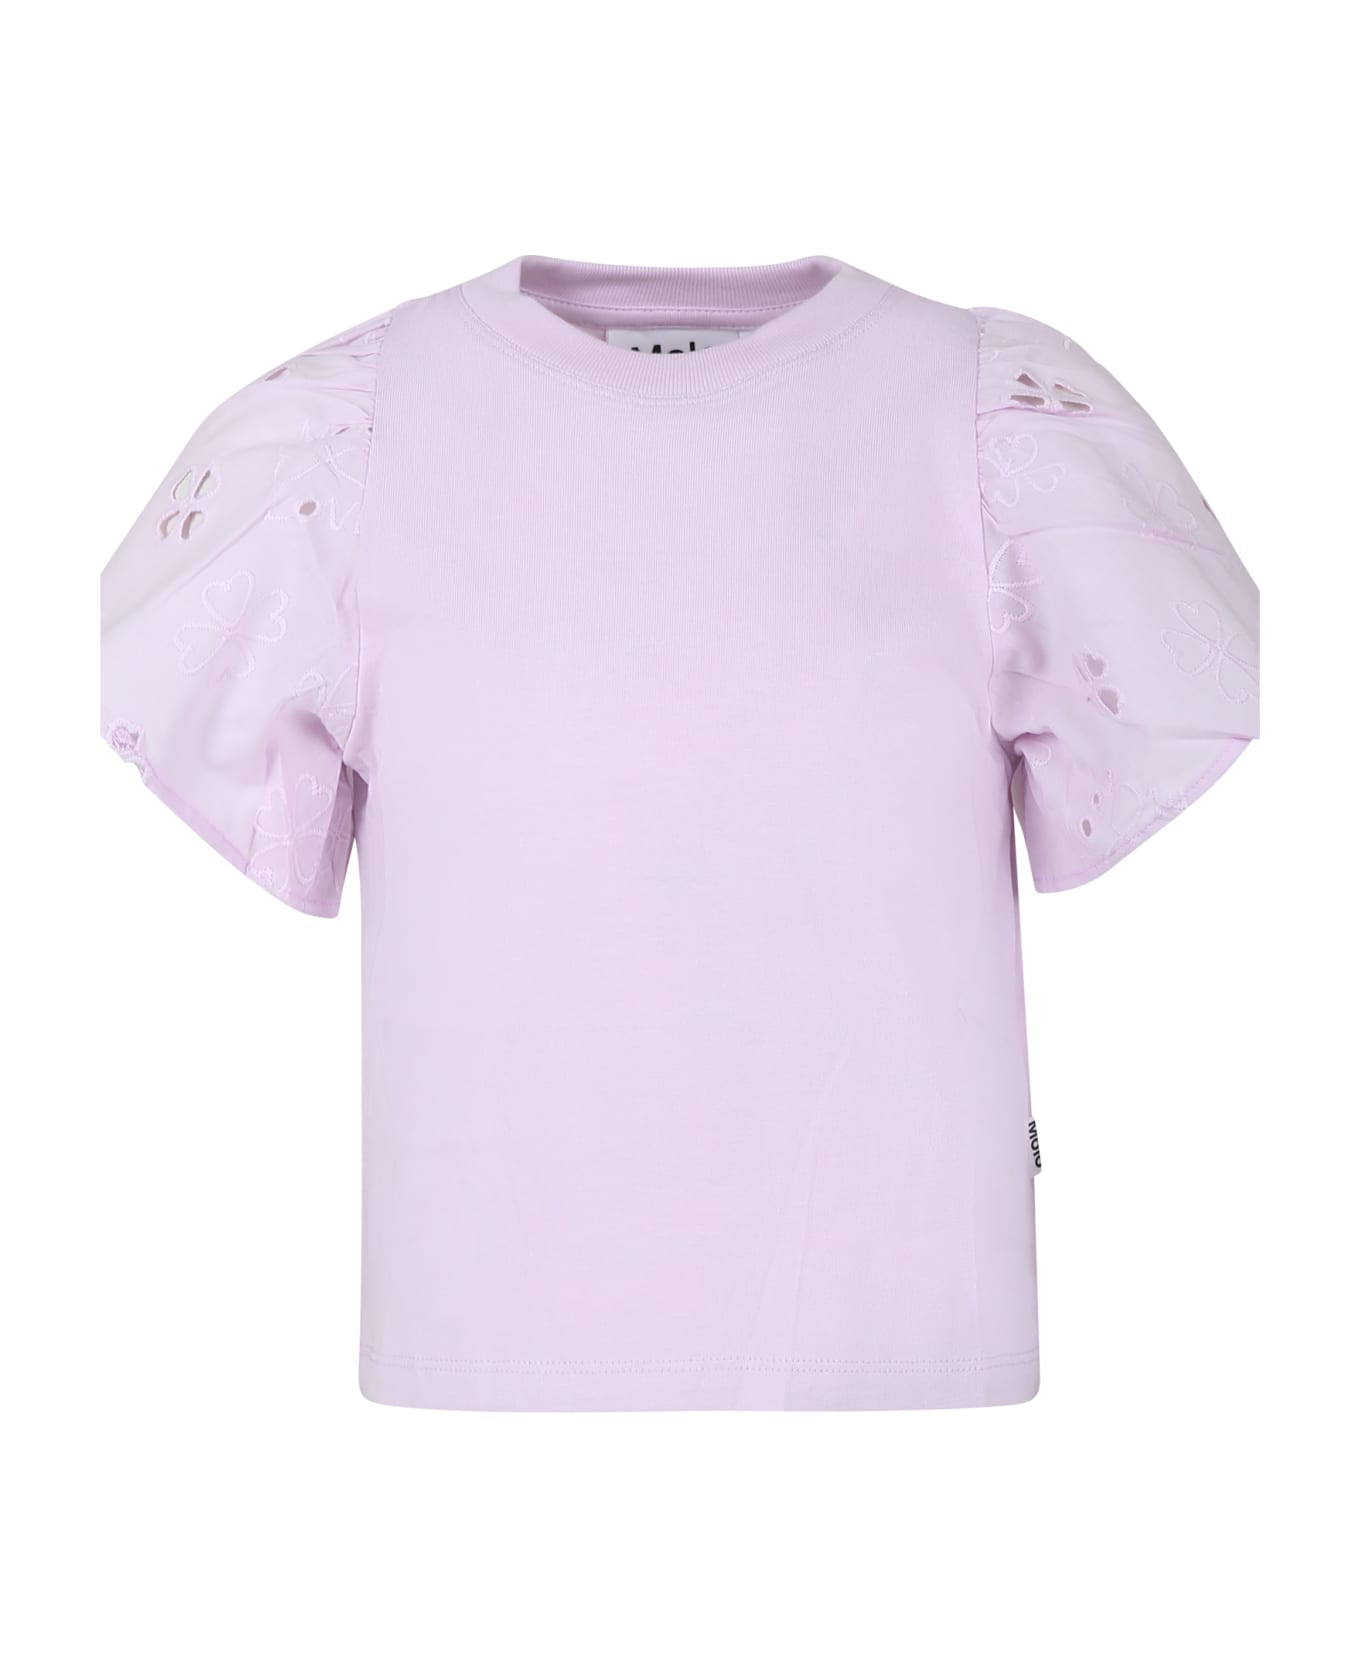 Molo Pink T-shirt For Girl With Macramé Lace - Pink Tシャツ＆ポロシャツ